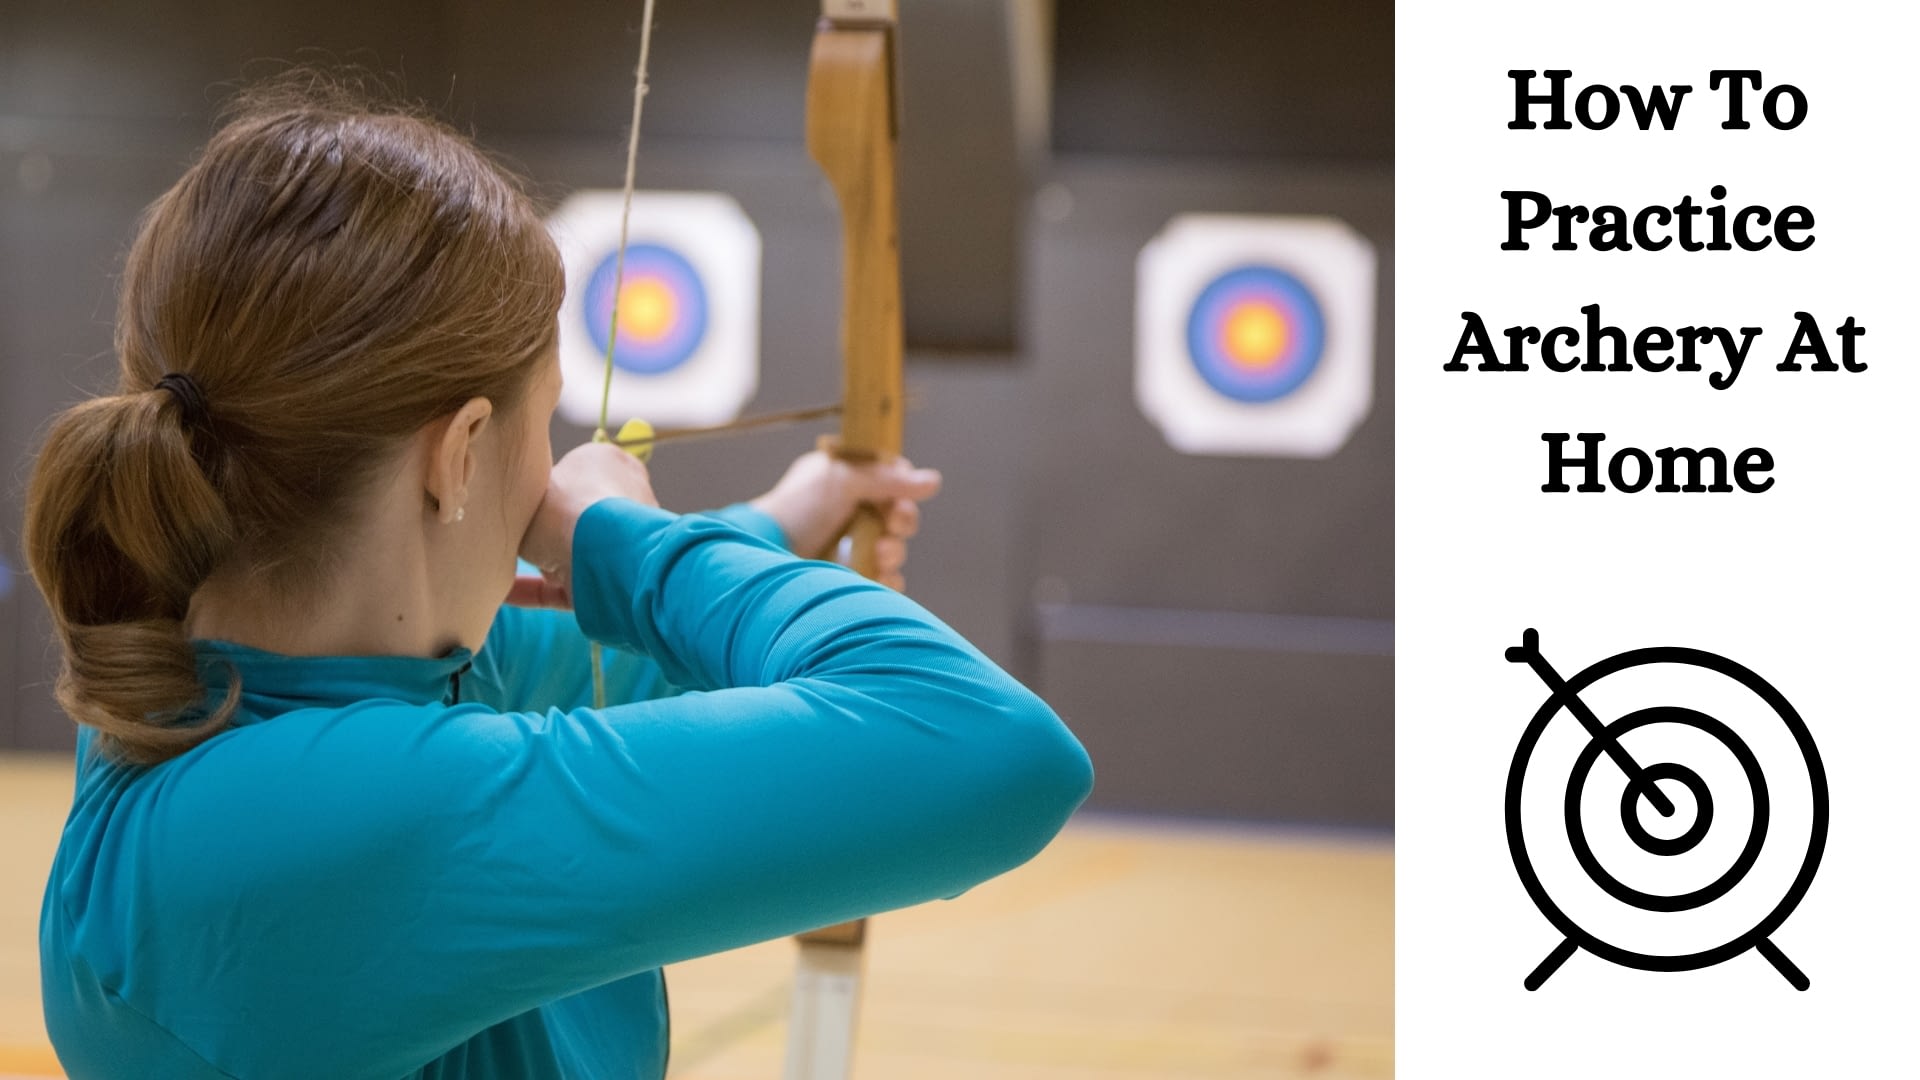 How to Practice Archery at Home